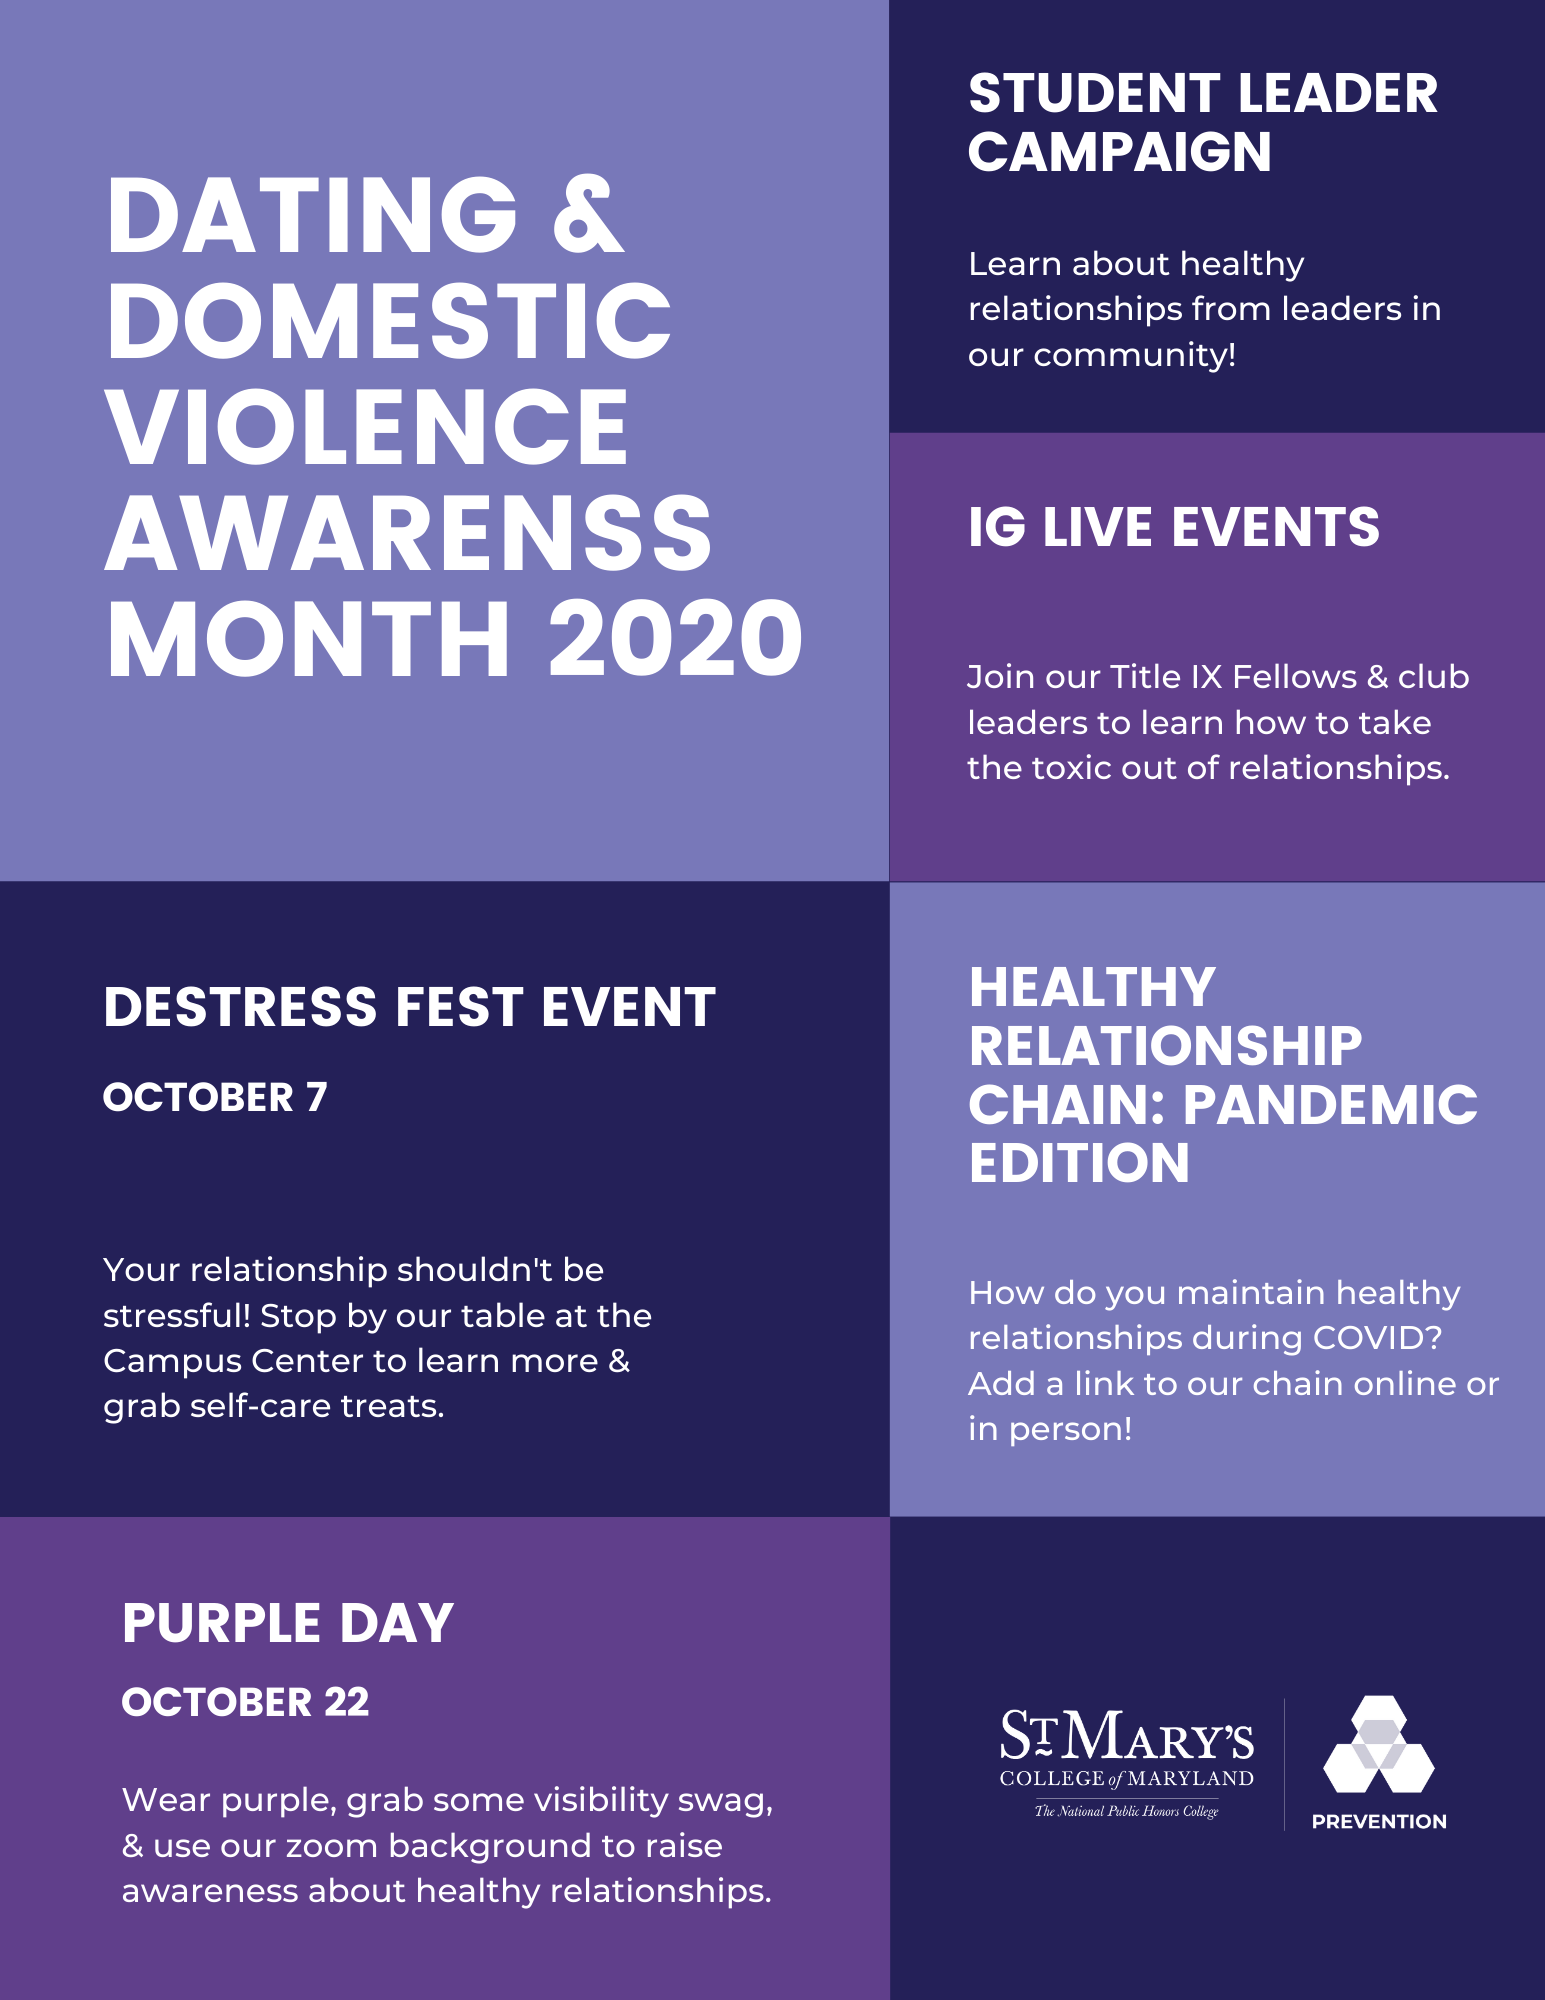 Flyer advertising Dating & Domestic Violence Awareness Events for the month of October which are repeated in the description. 